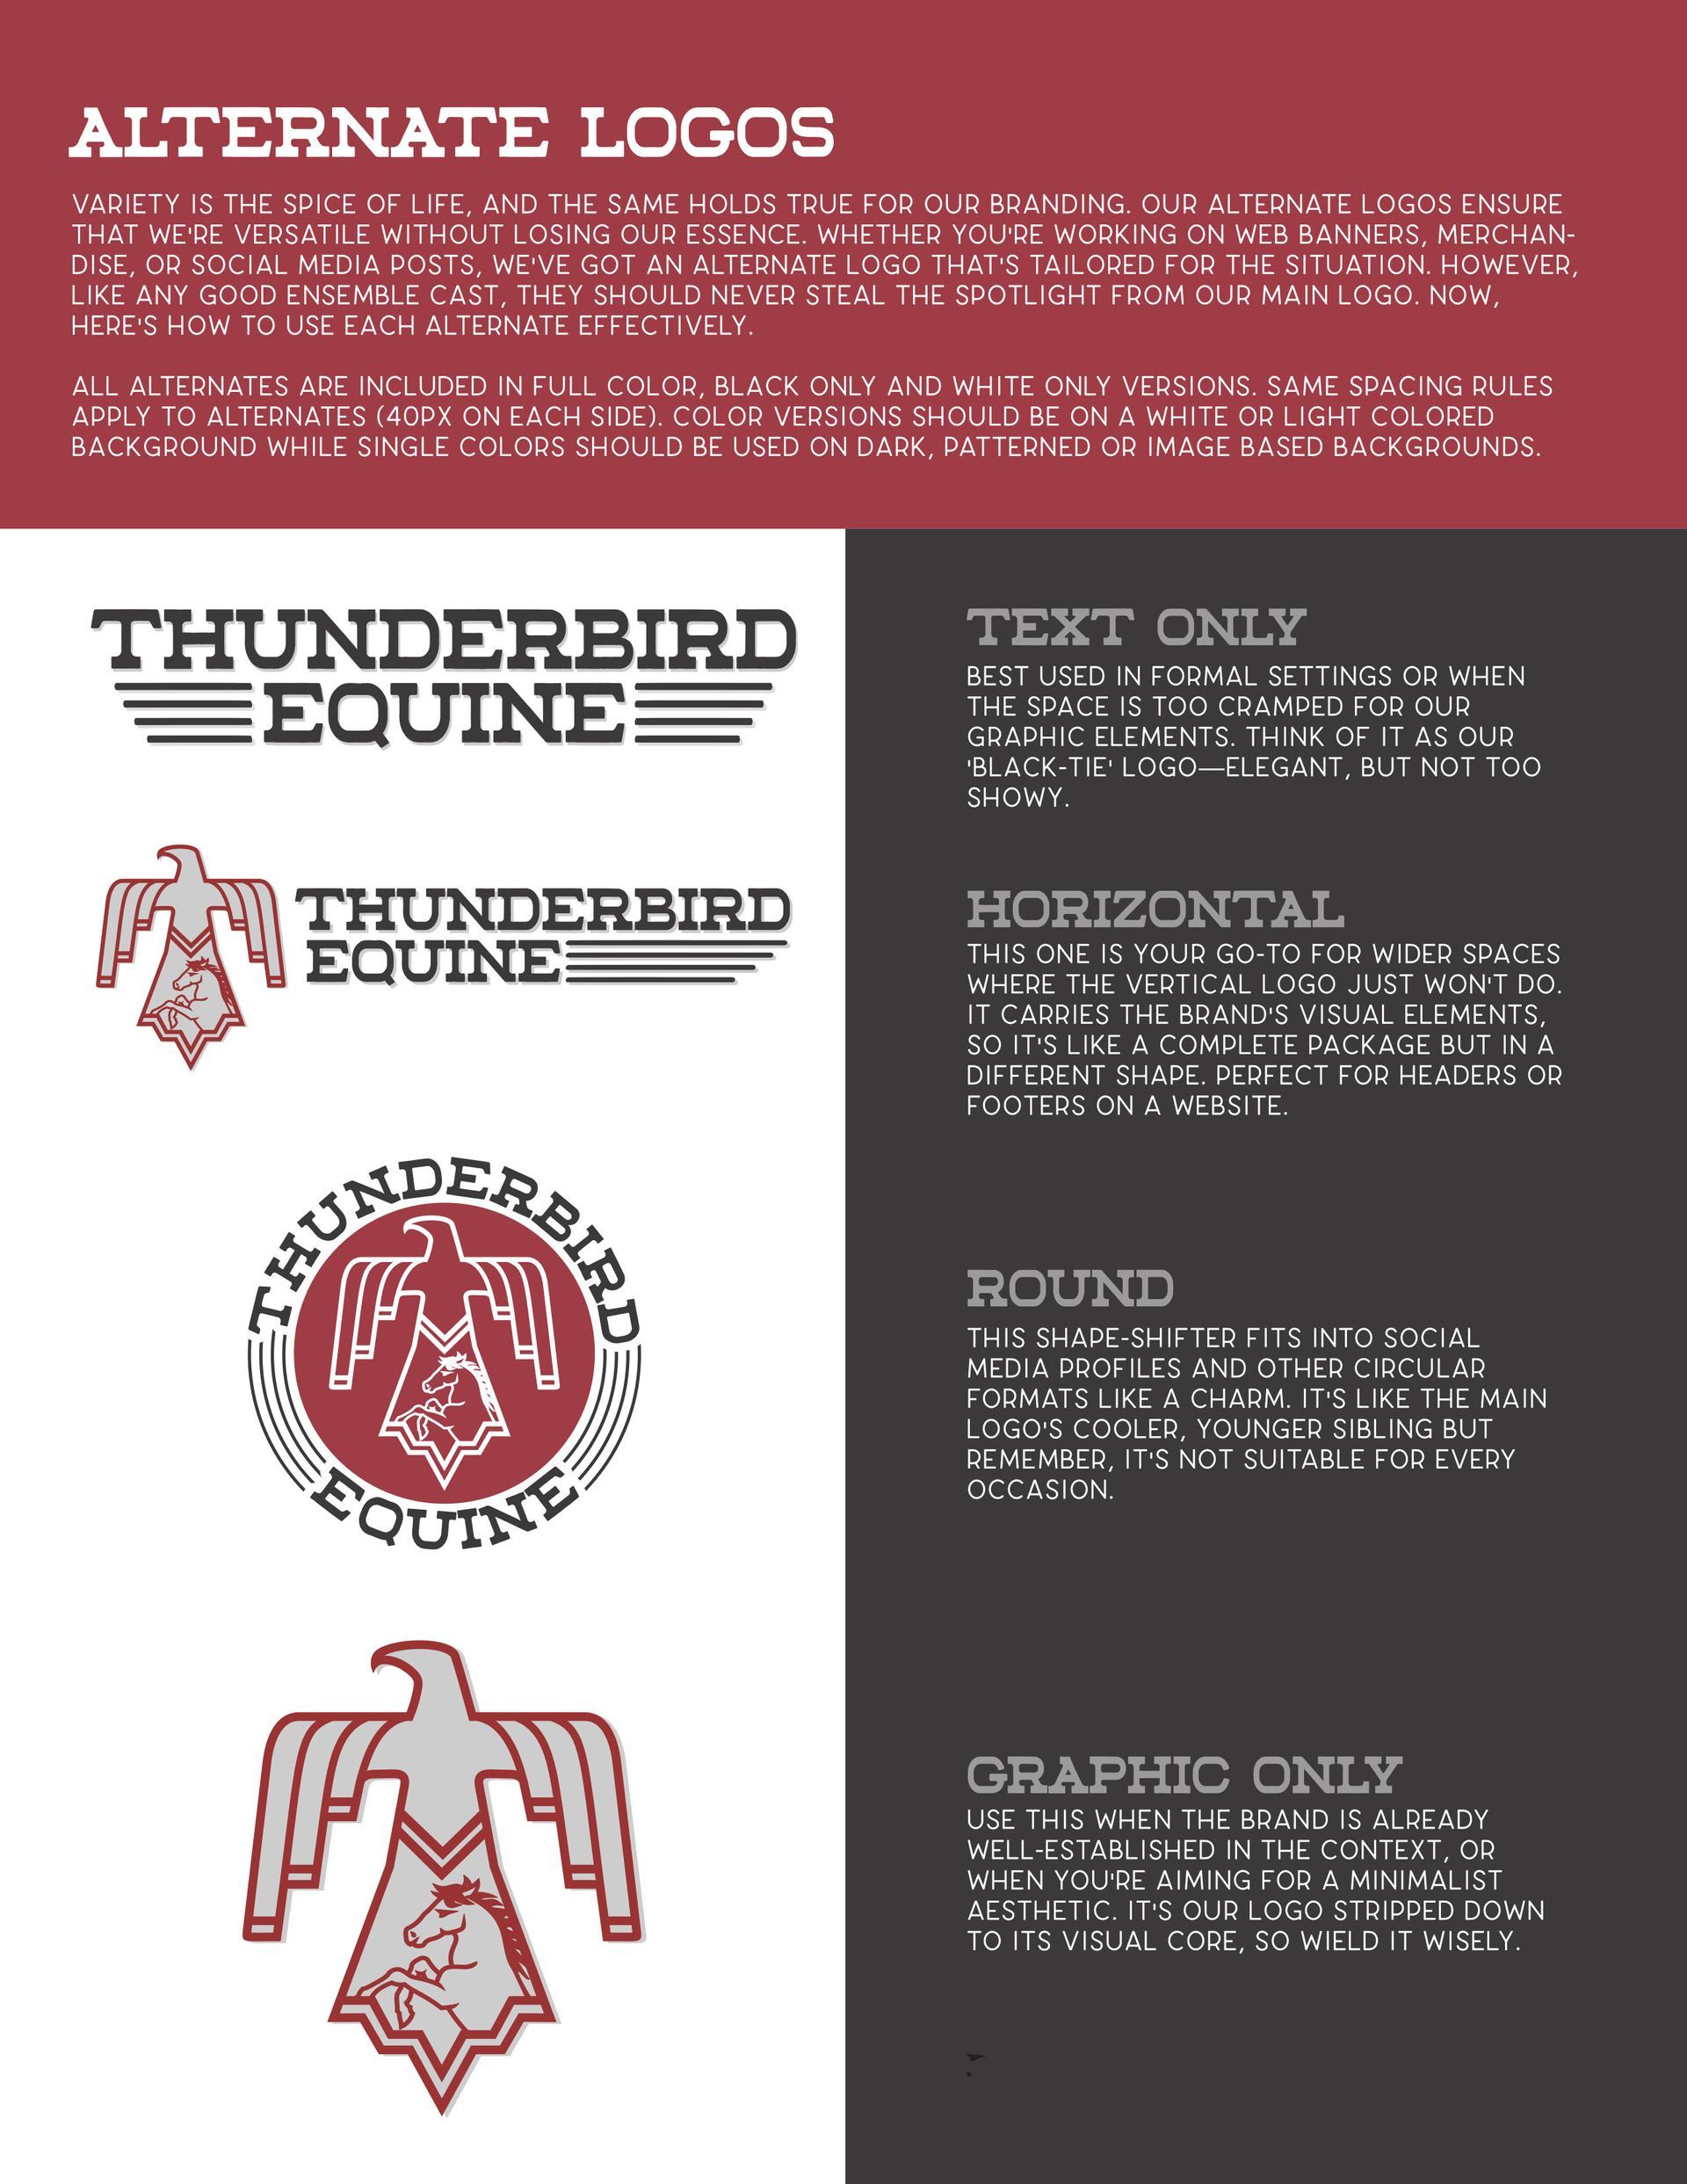 A poster showing alternate logos for thunderbird equine